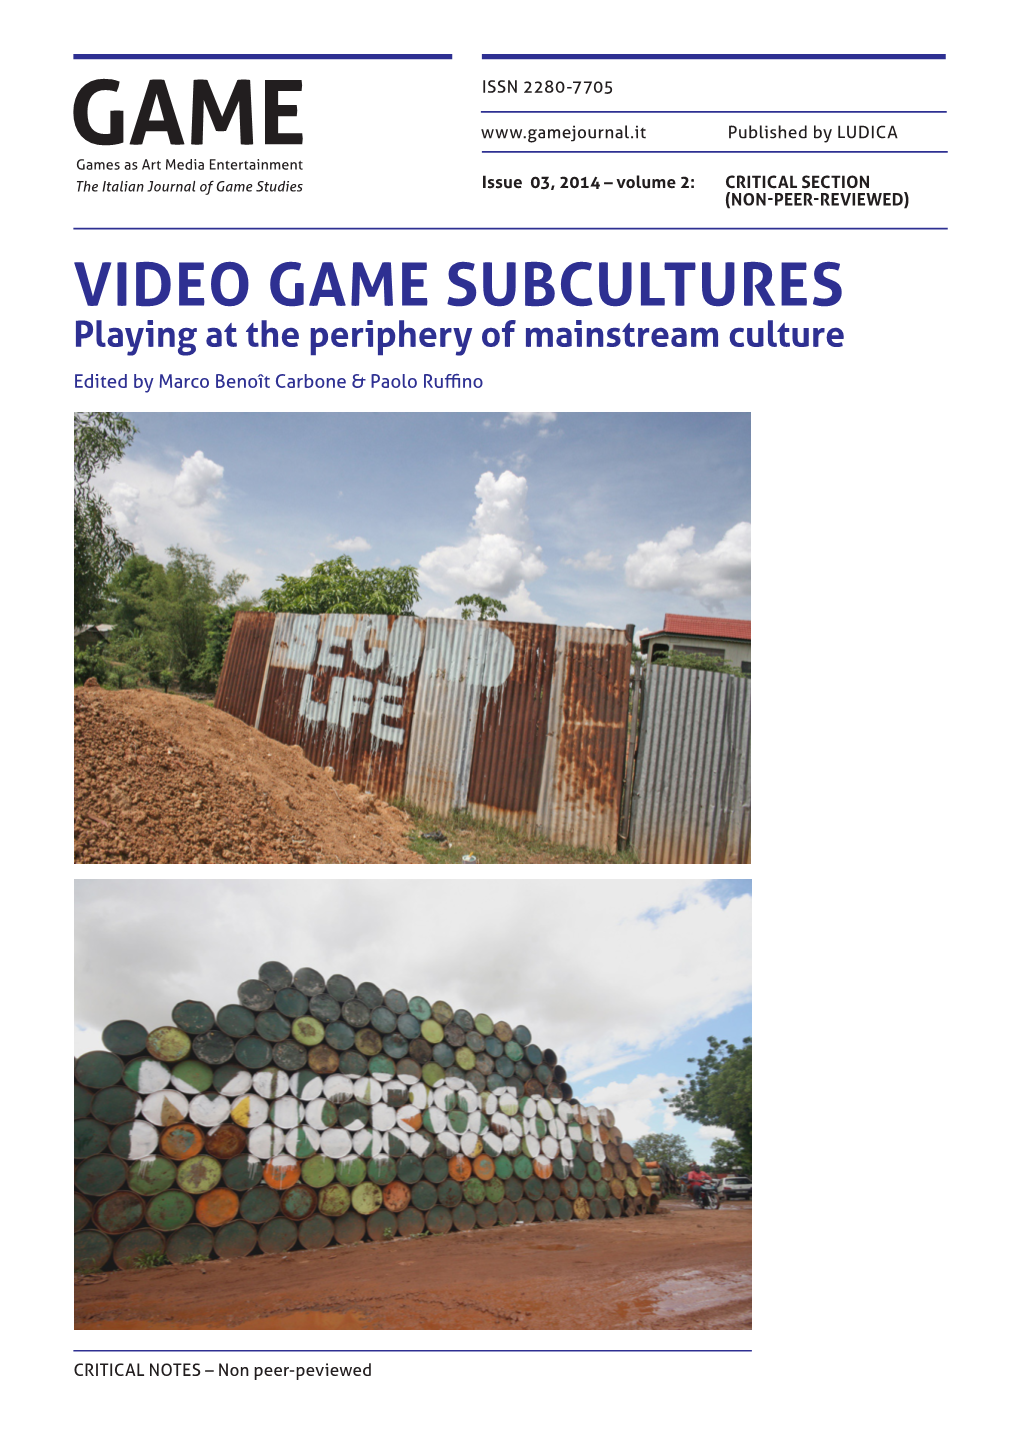 VIDEO GAME SUBCULTURES Playing at the Periphery of Mainstream Culture Edited by Marco Benoît Carbone & Paolo Ruffino